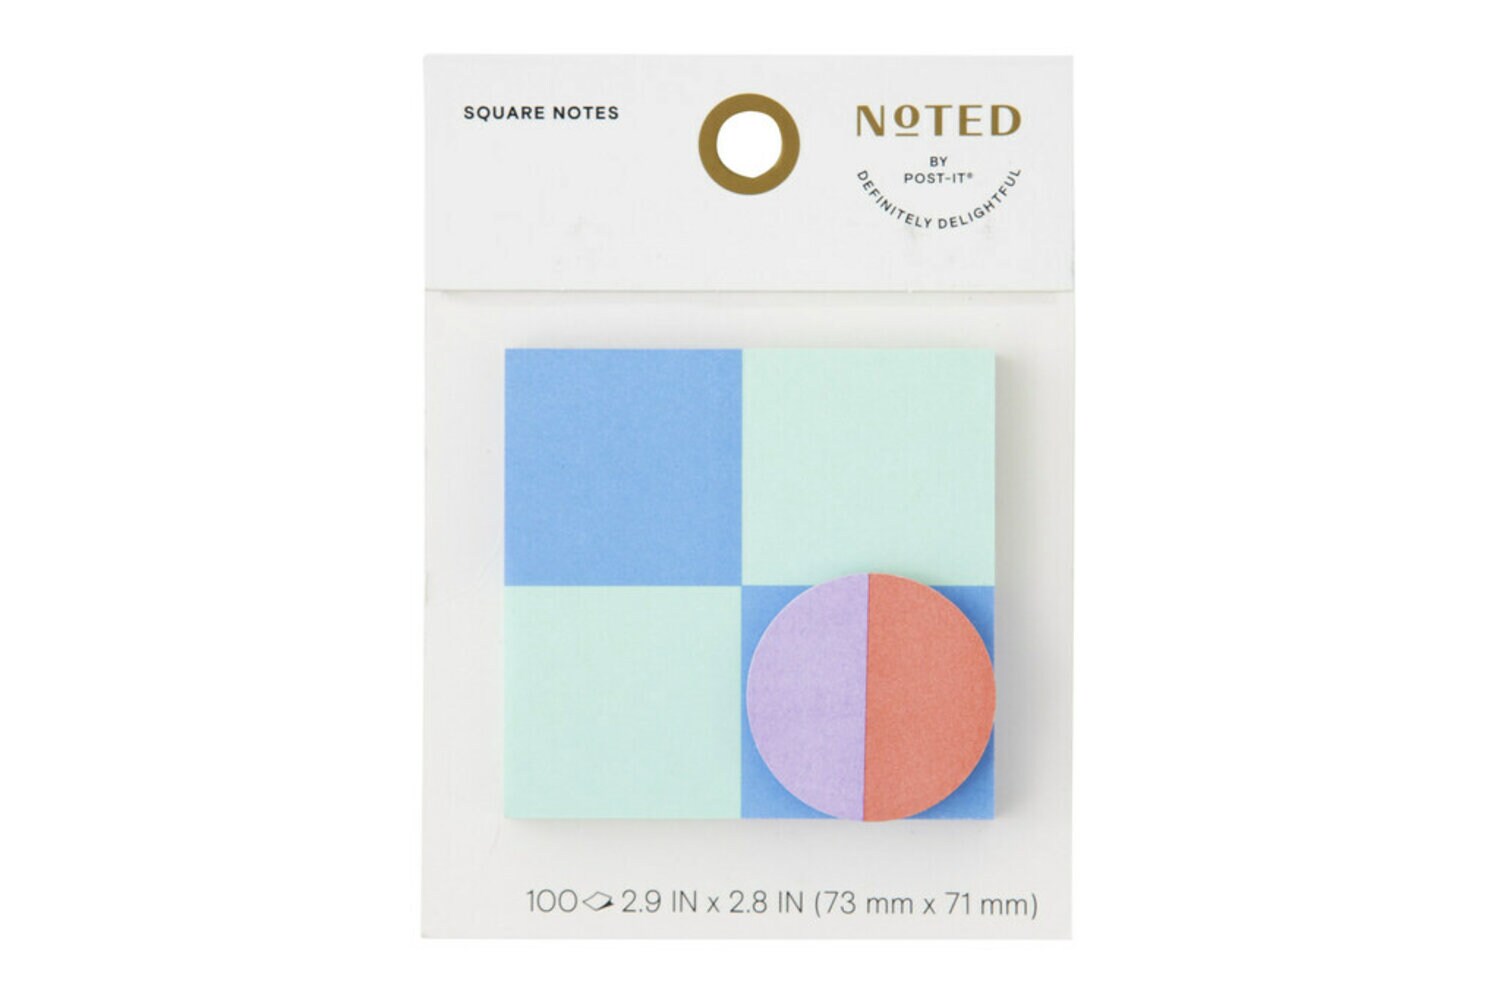 7100292441 - Post-it Square & Round Mini Notes NTDW-331-2, 2.9 in x 2.8in 100 sheet/pad 1.4in x 1.4in 50 sheet/pad